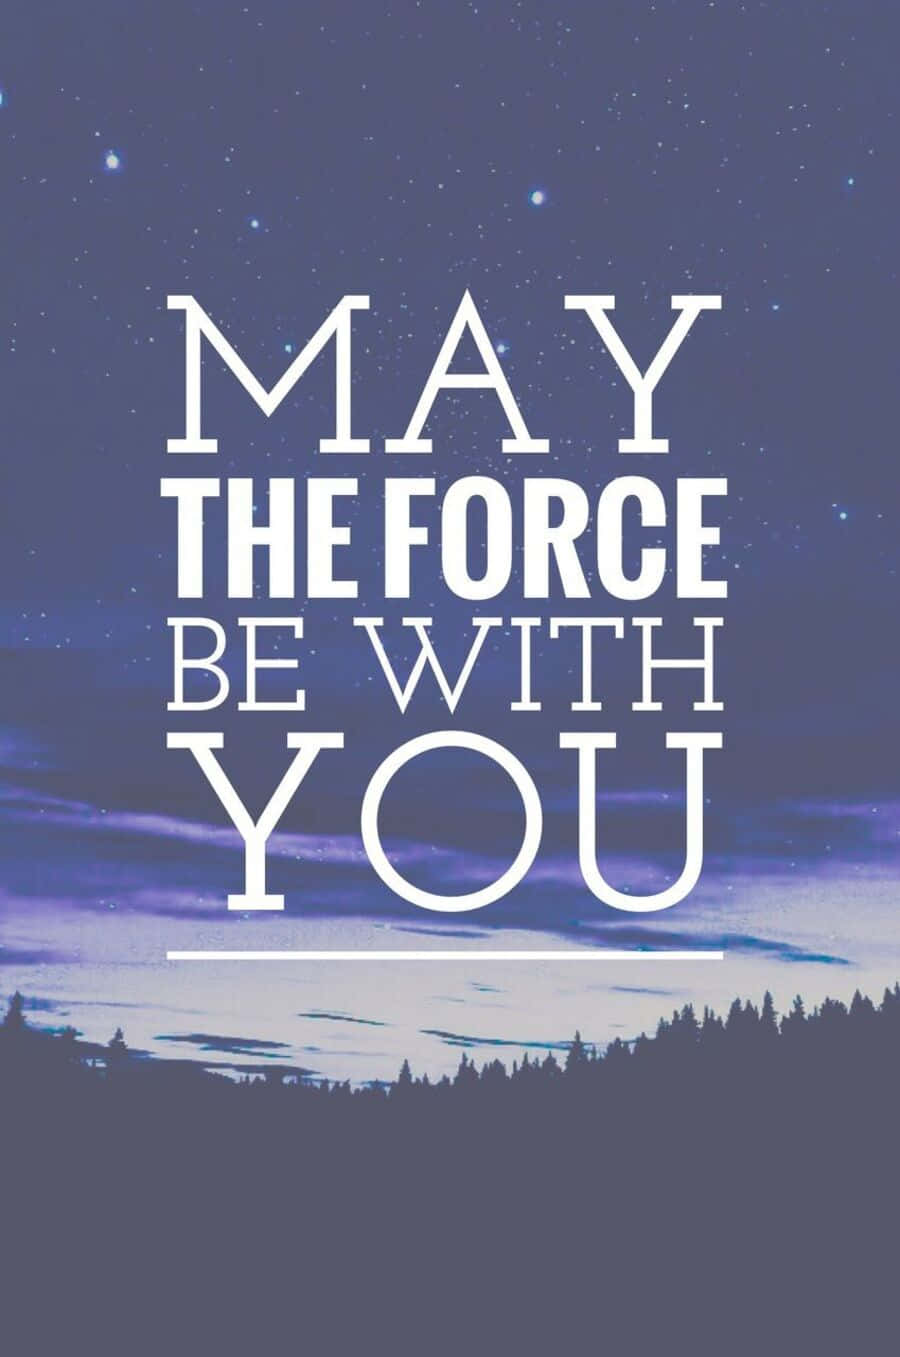 May The Force Be With You - Inspirational Star Wars Quote Background